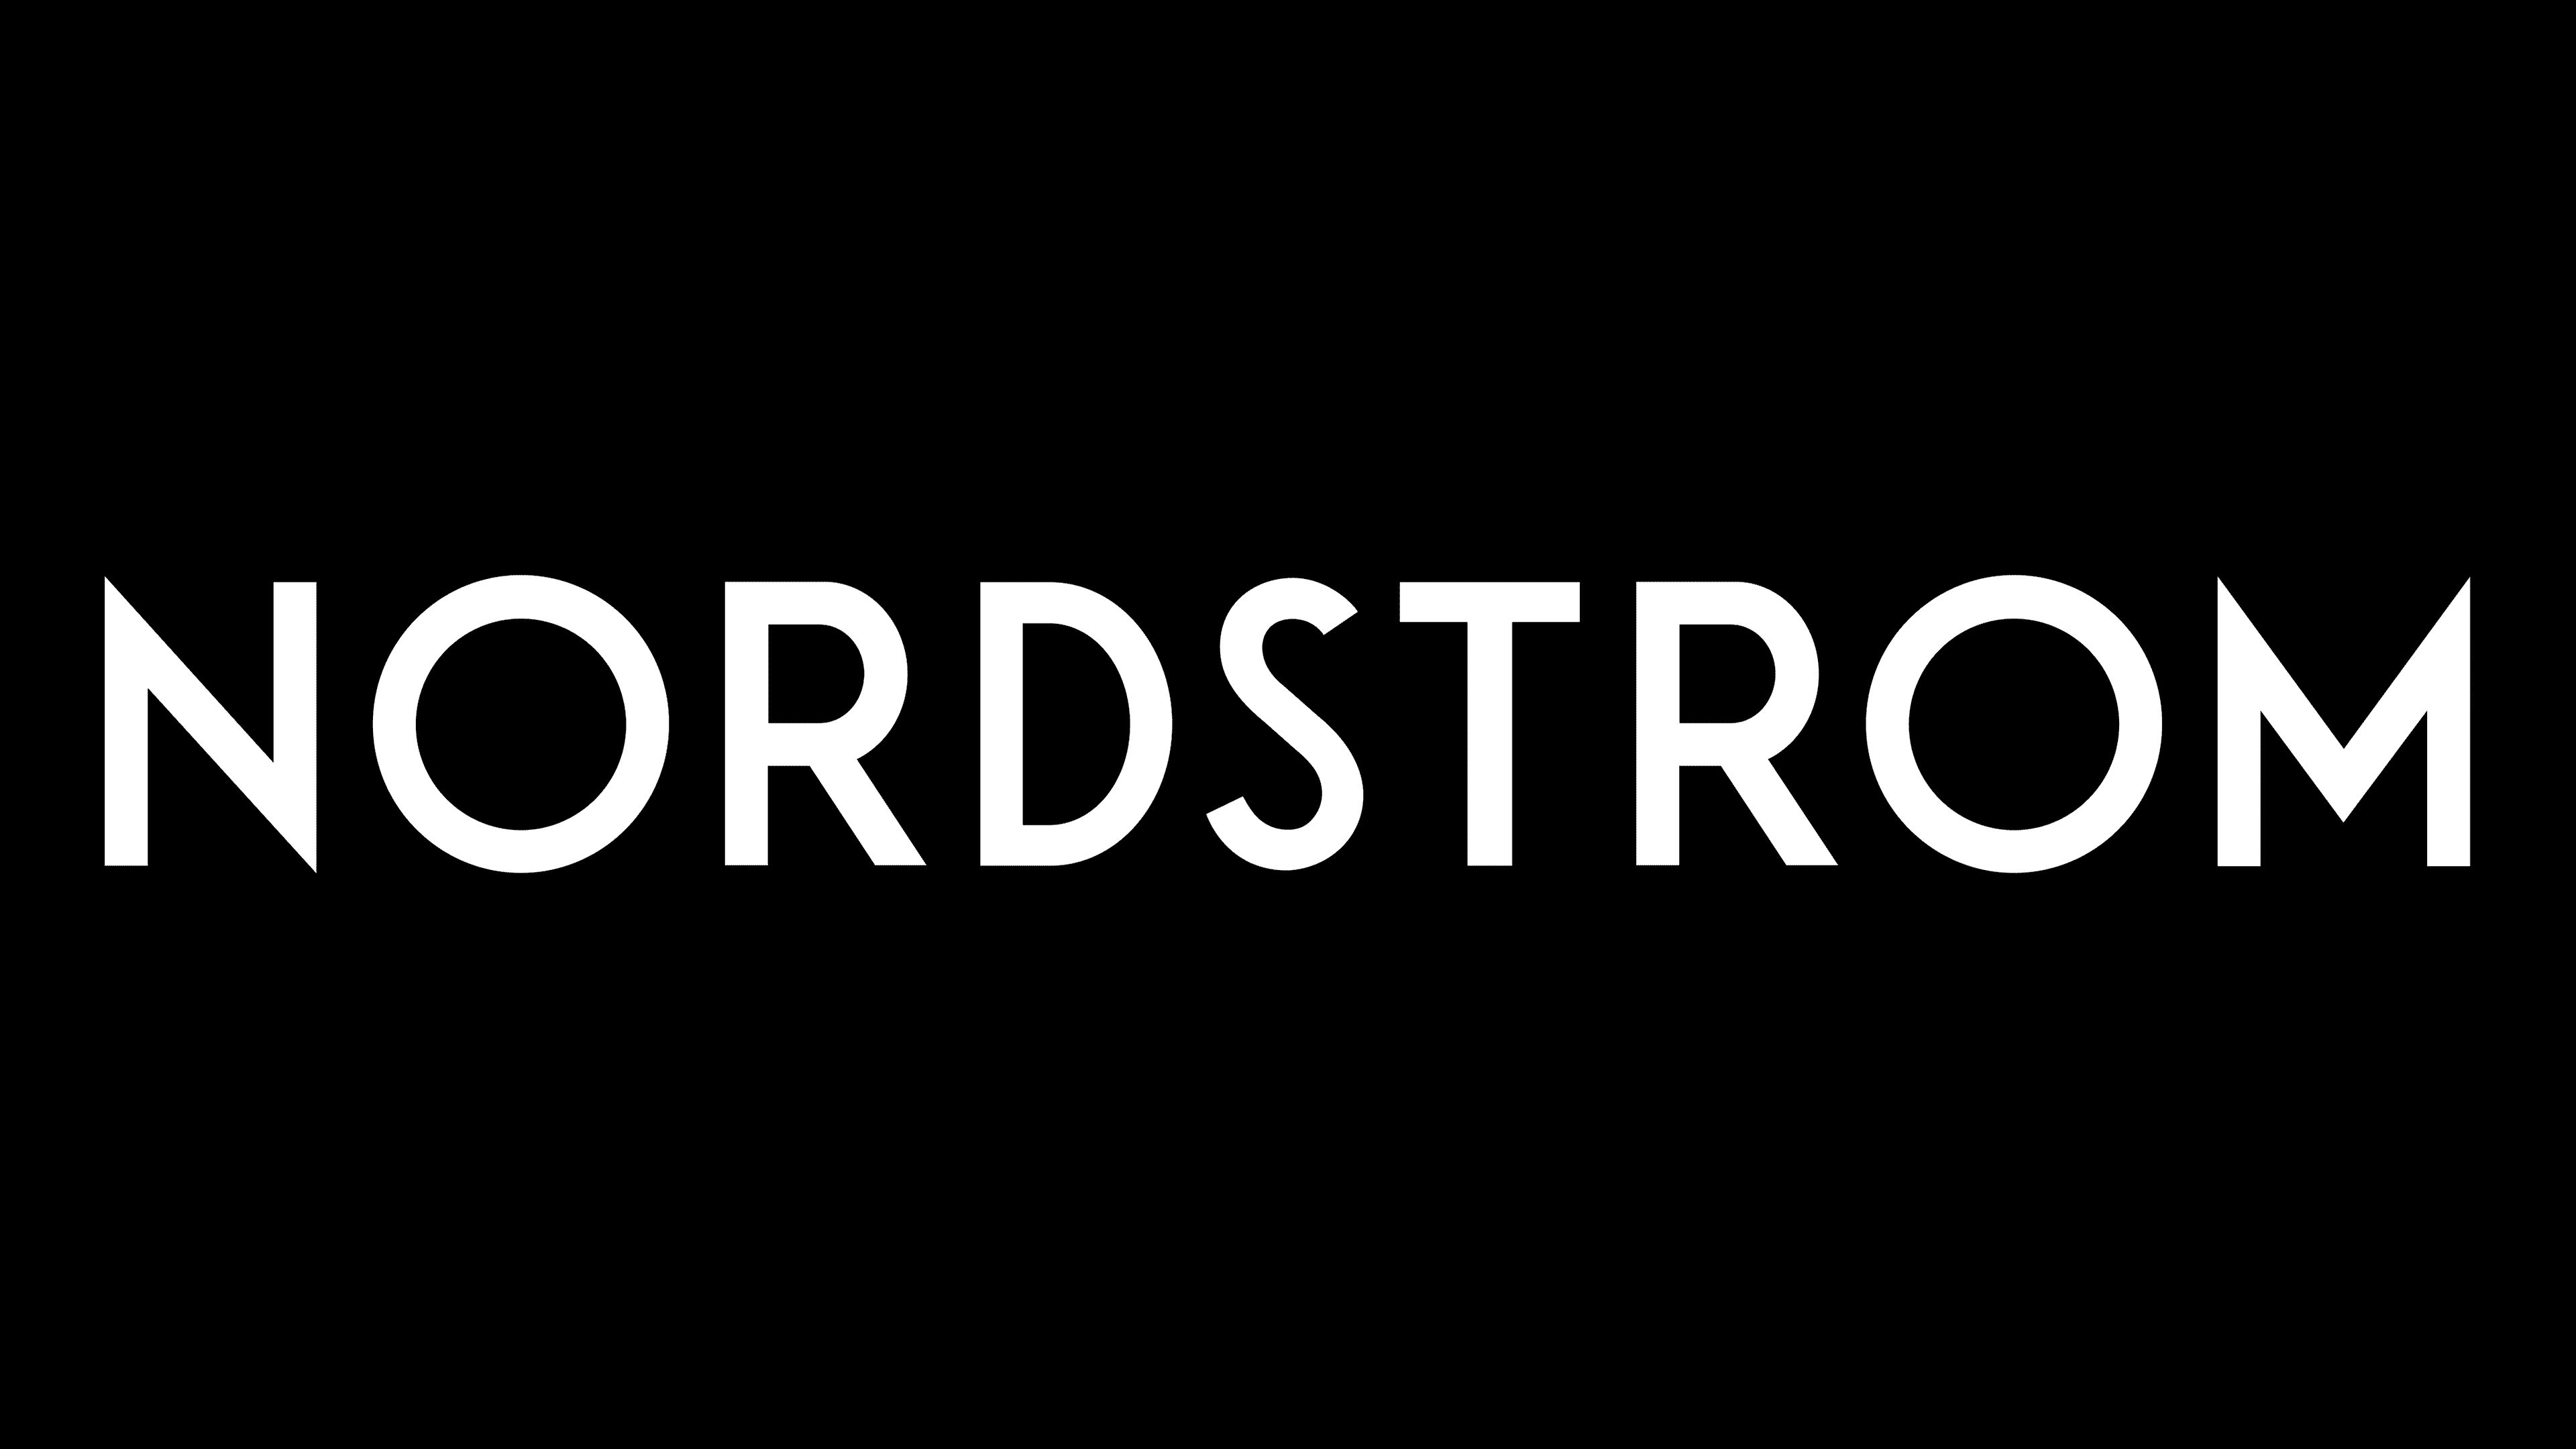 Why Nordstrom Rack changed its logo—see the rebrand